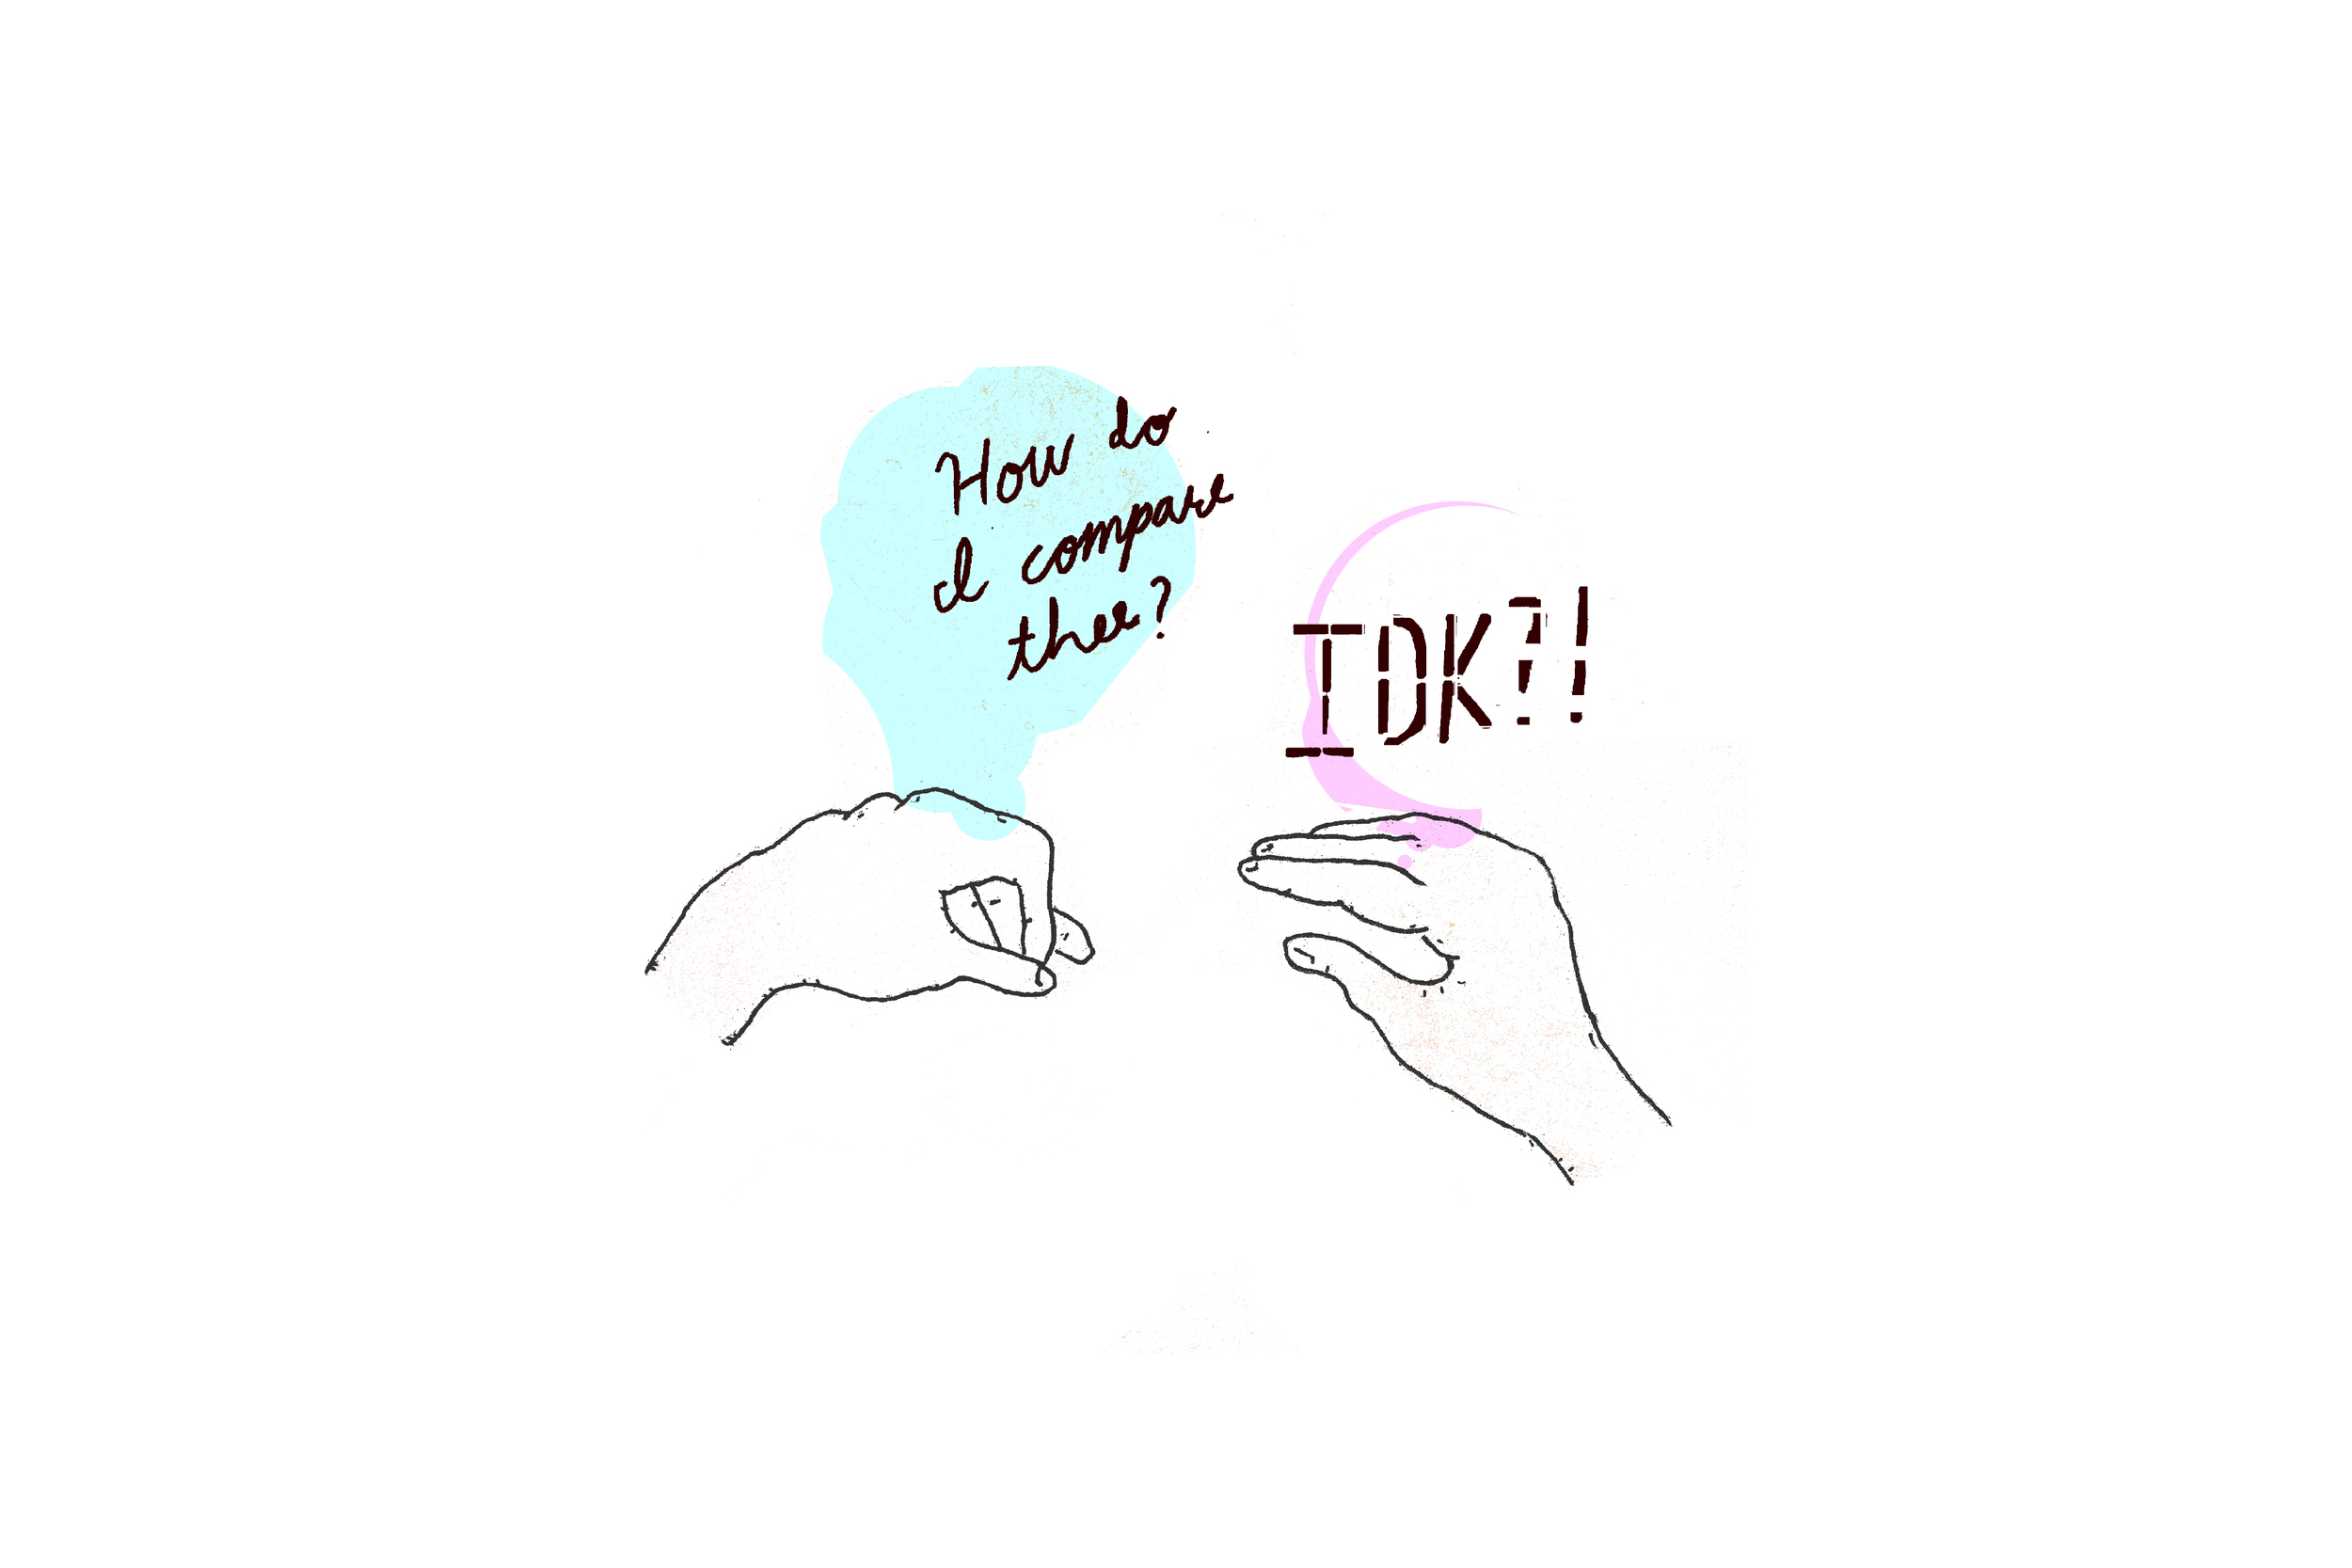 Talking With Your Fingers, 2012